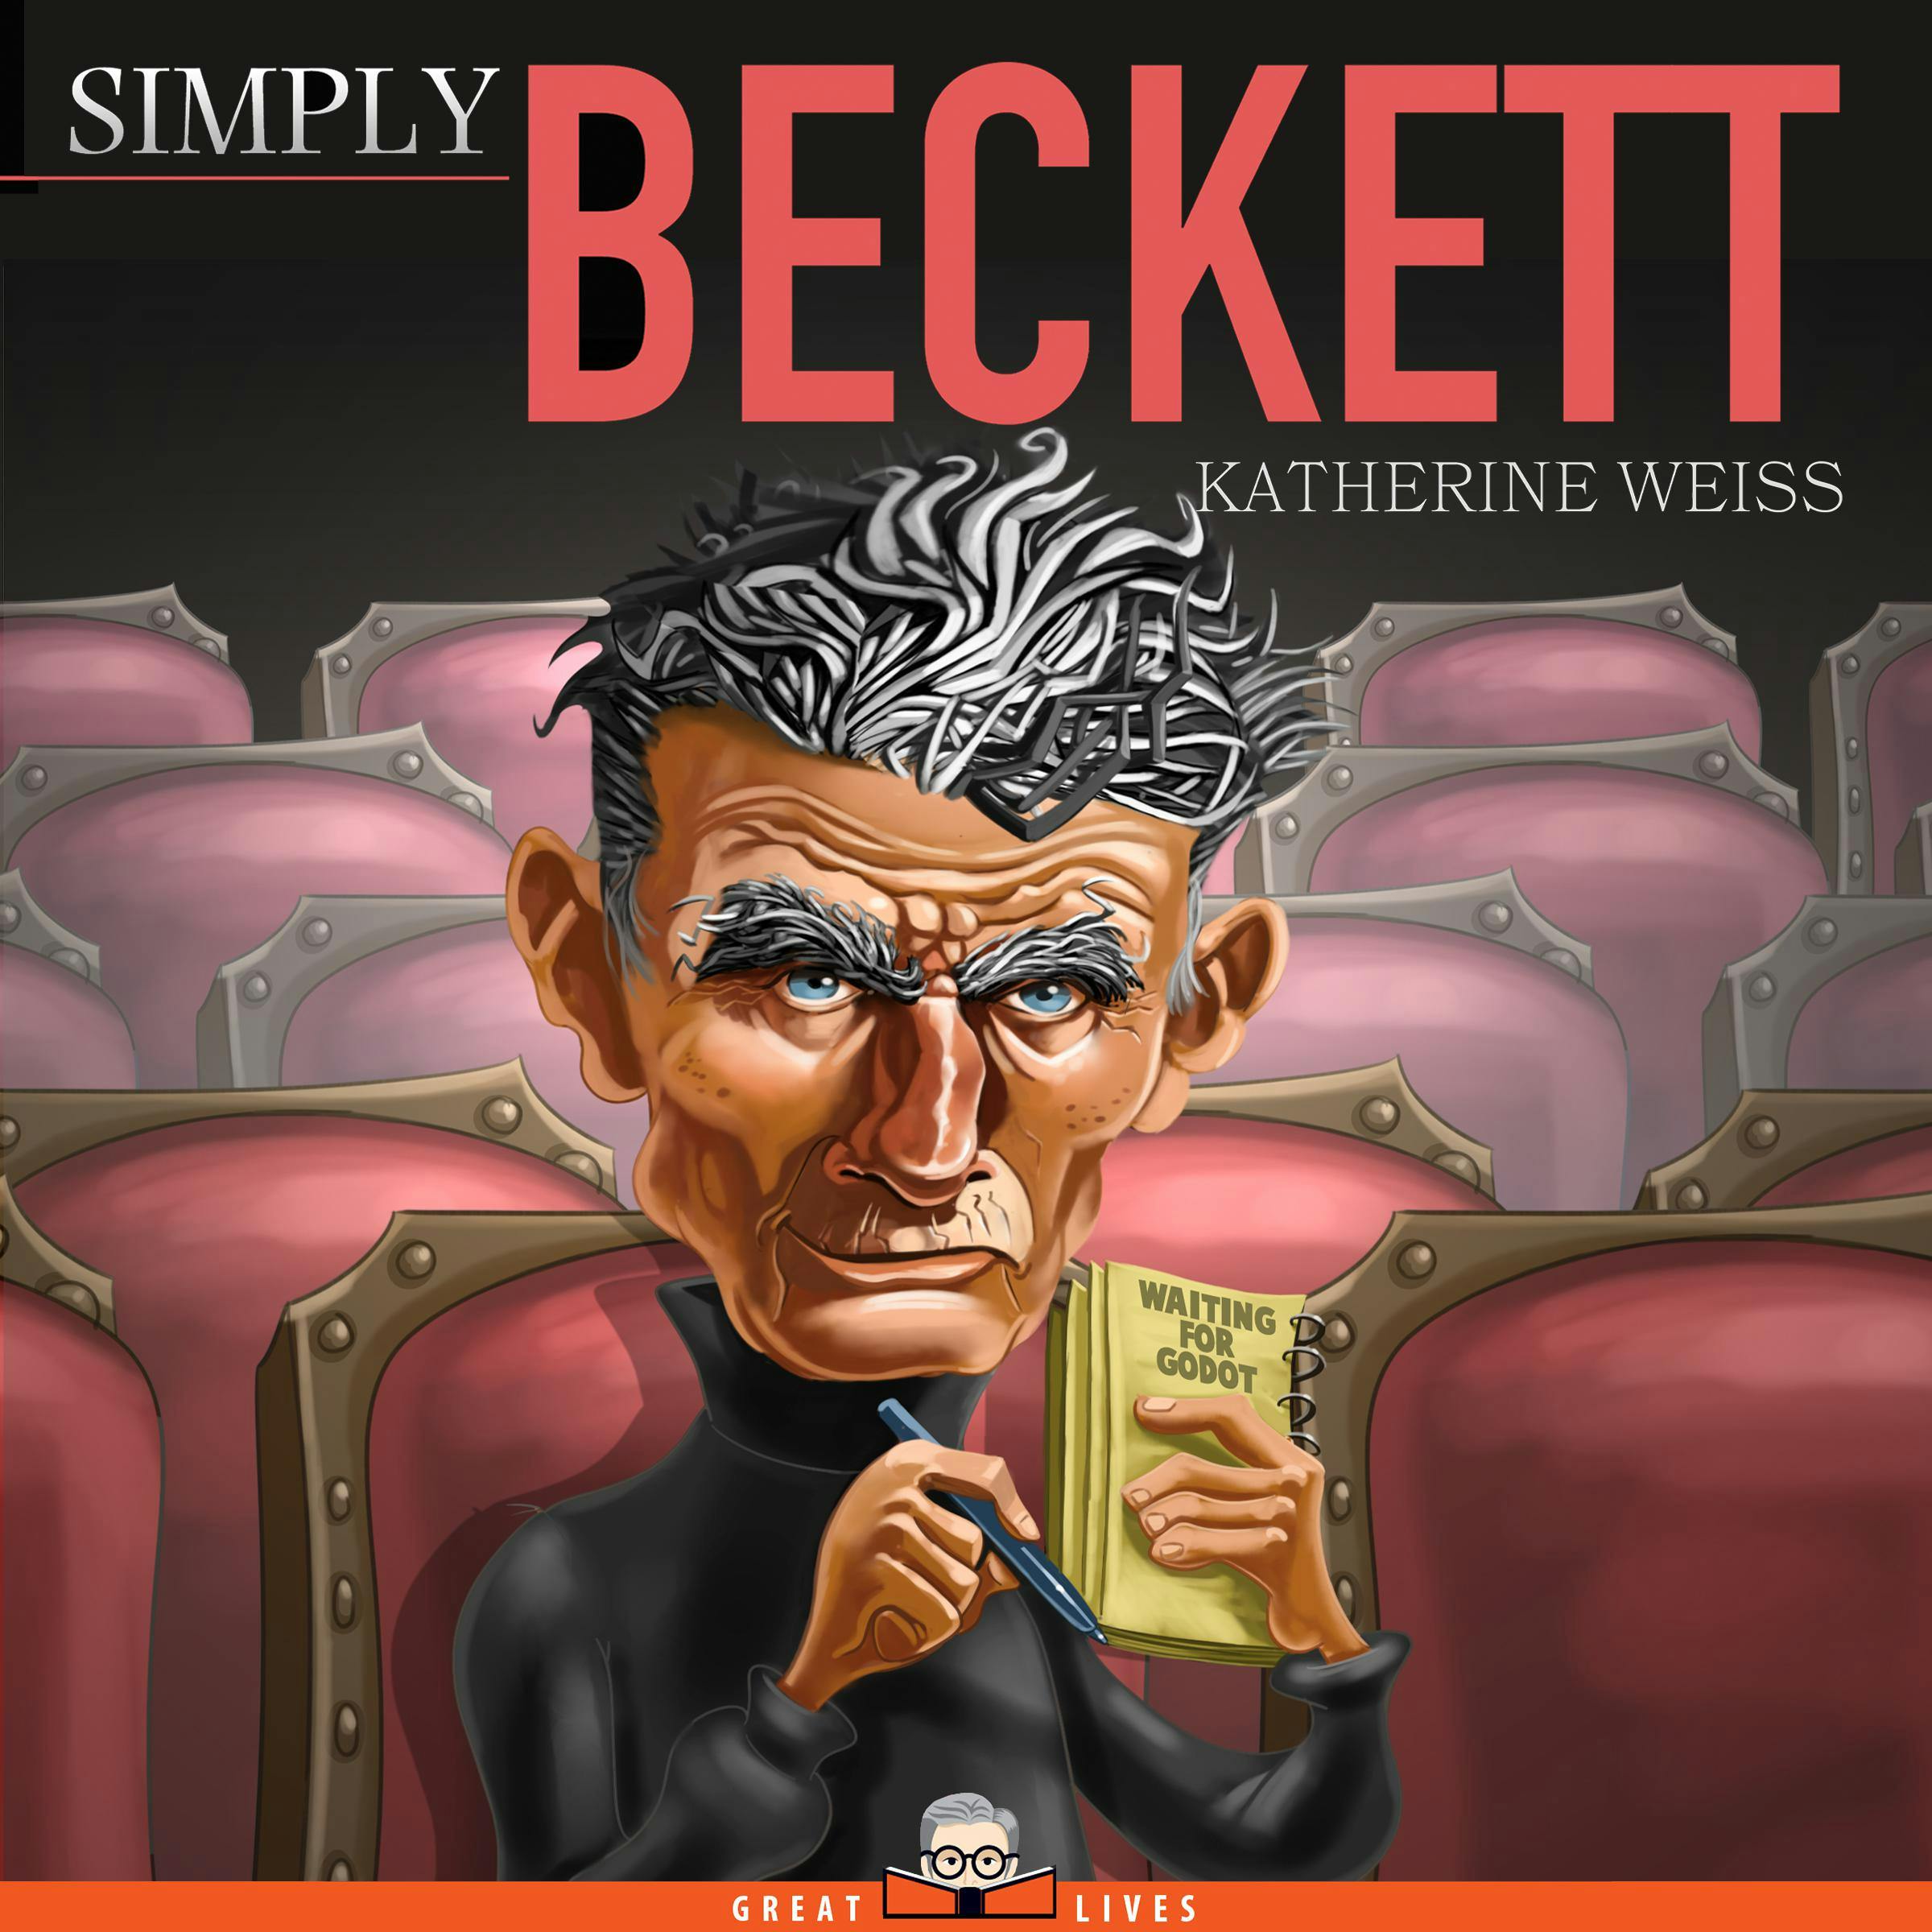 Simply Beckett - undefined